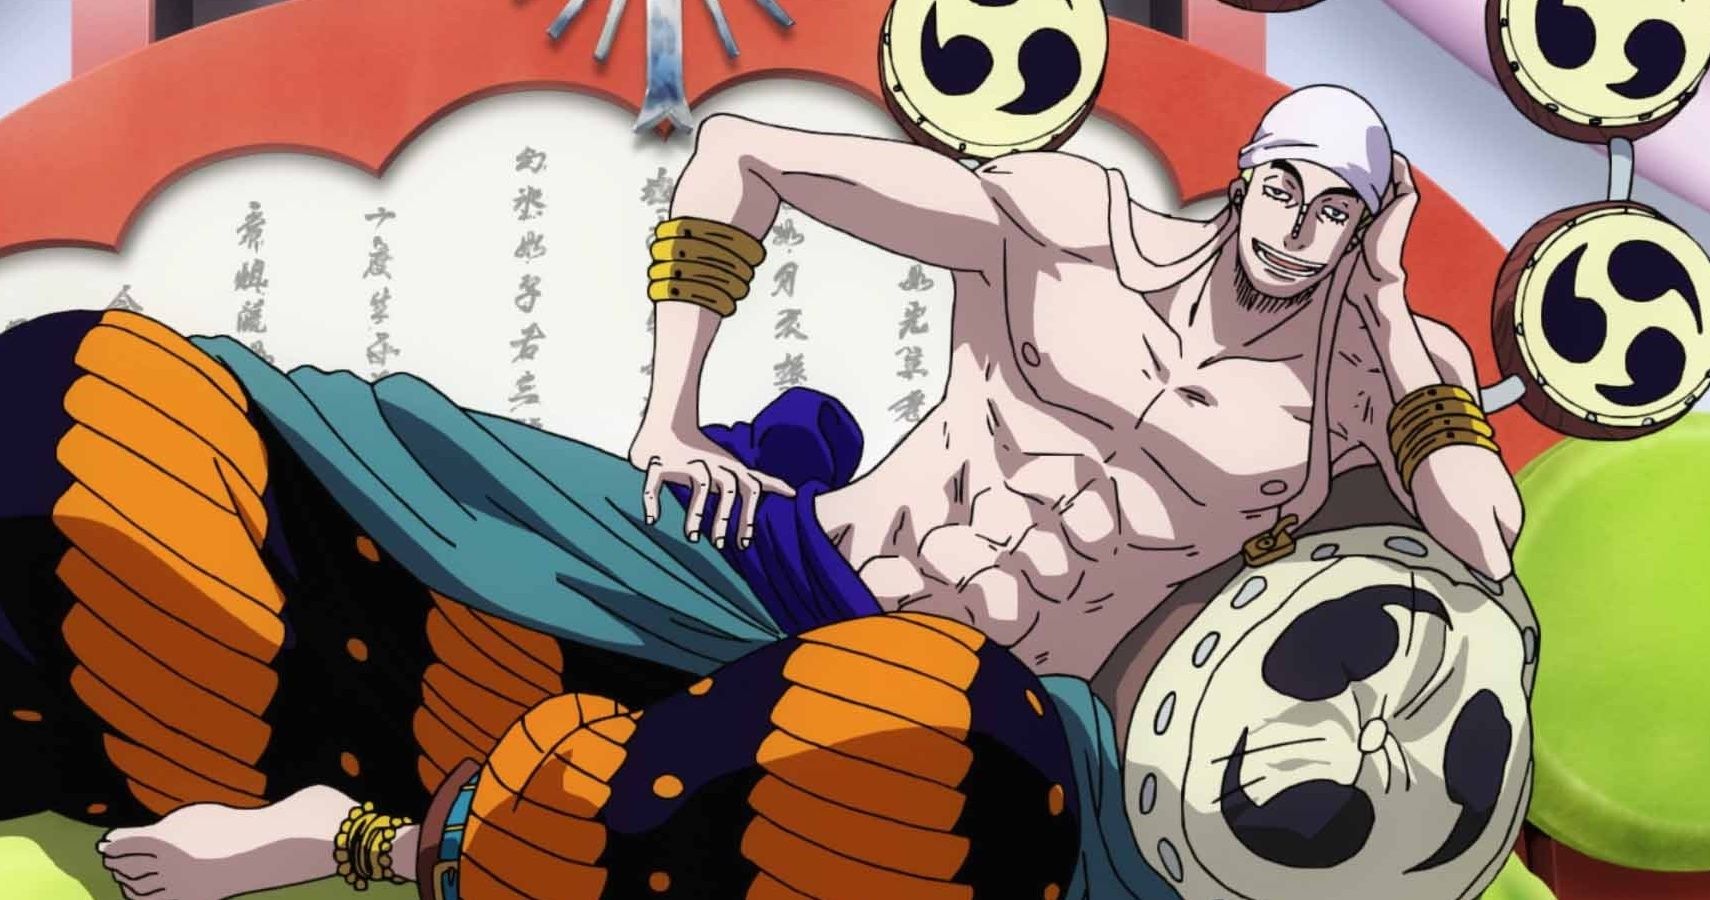 Enel lounges on his throne in One Piece